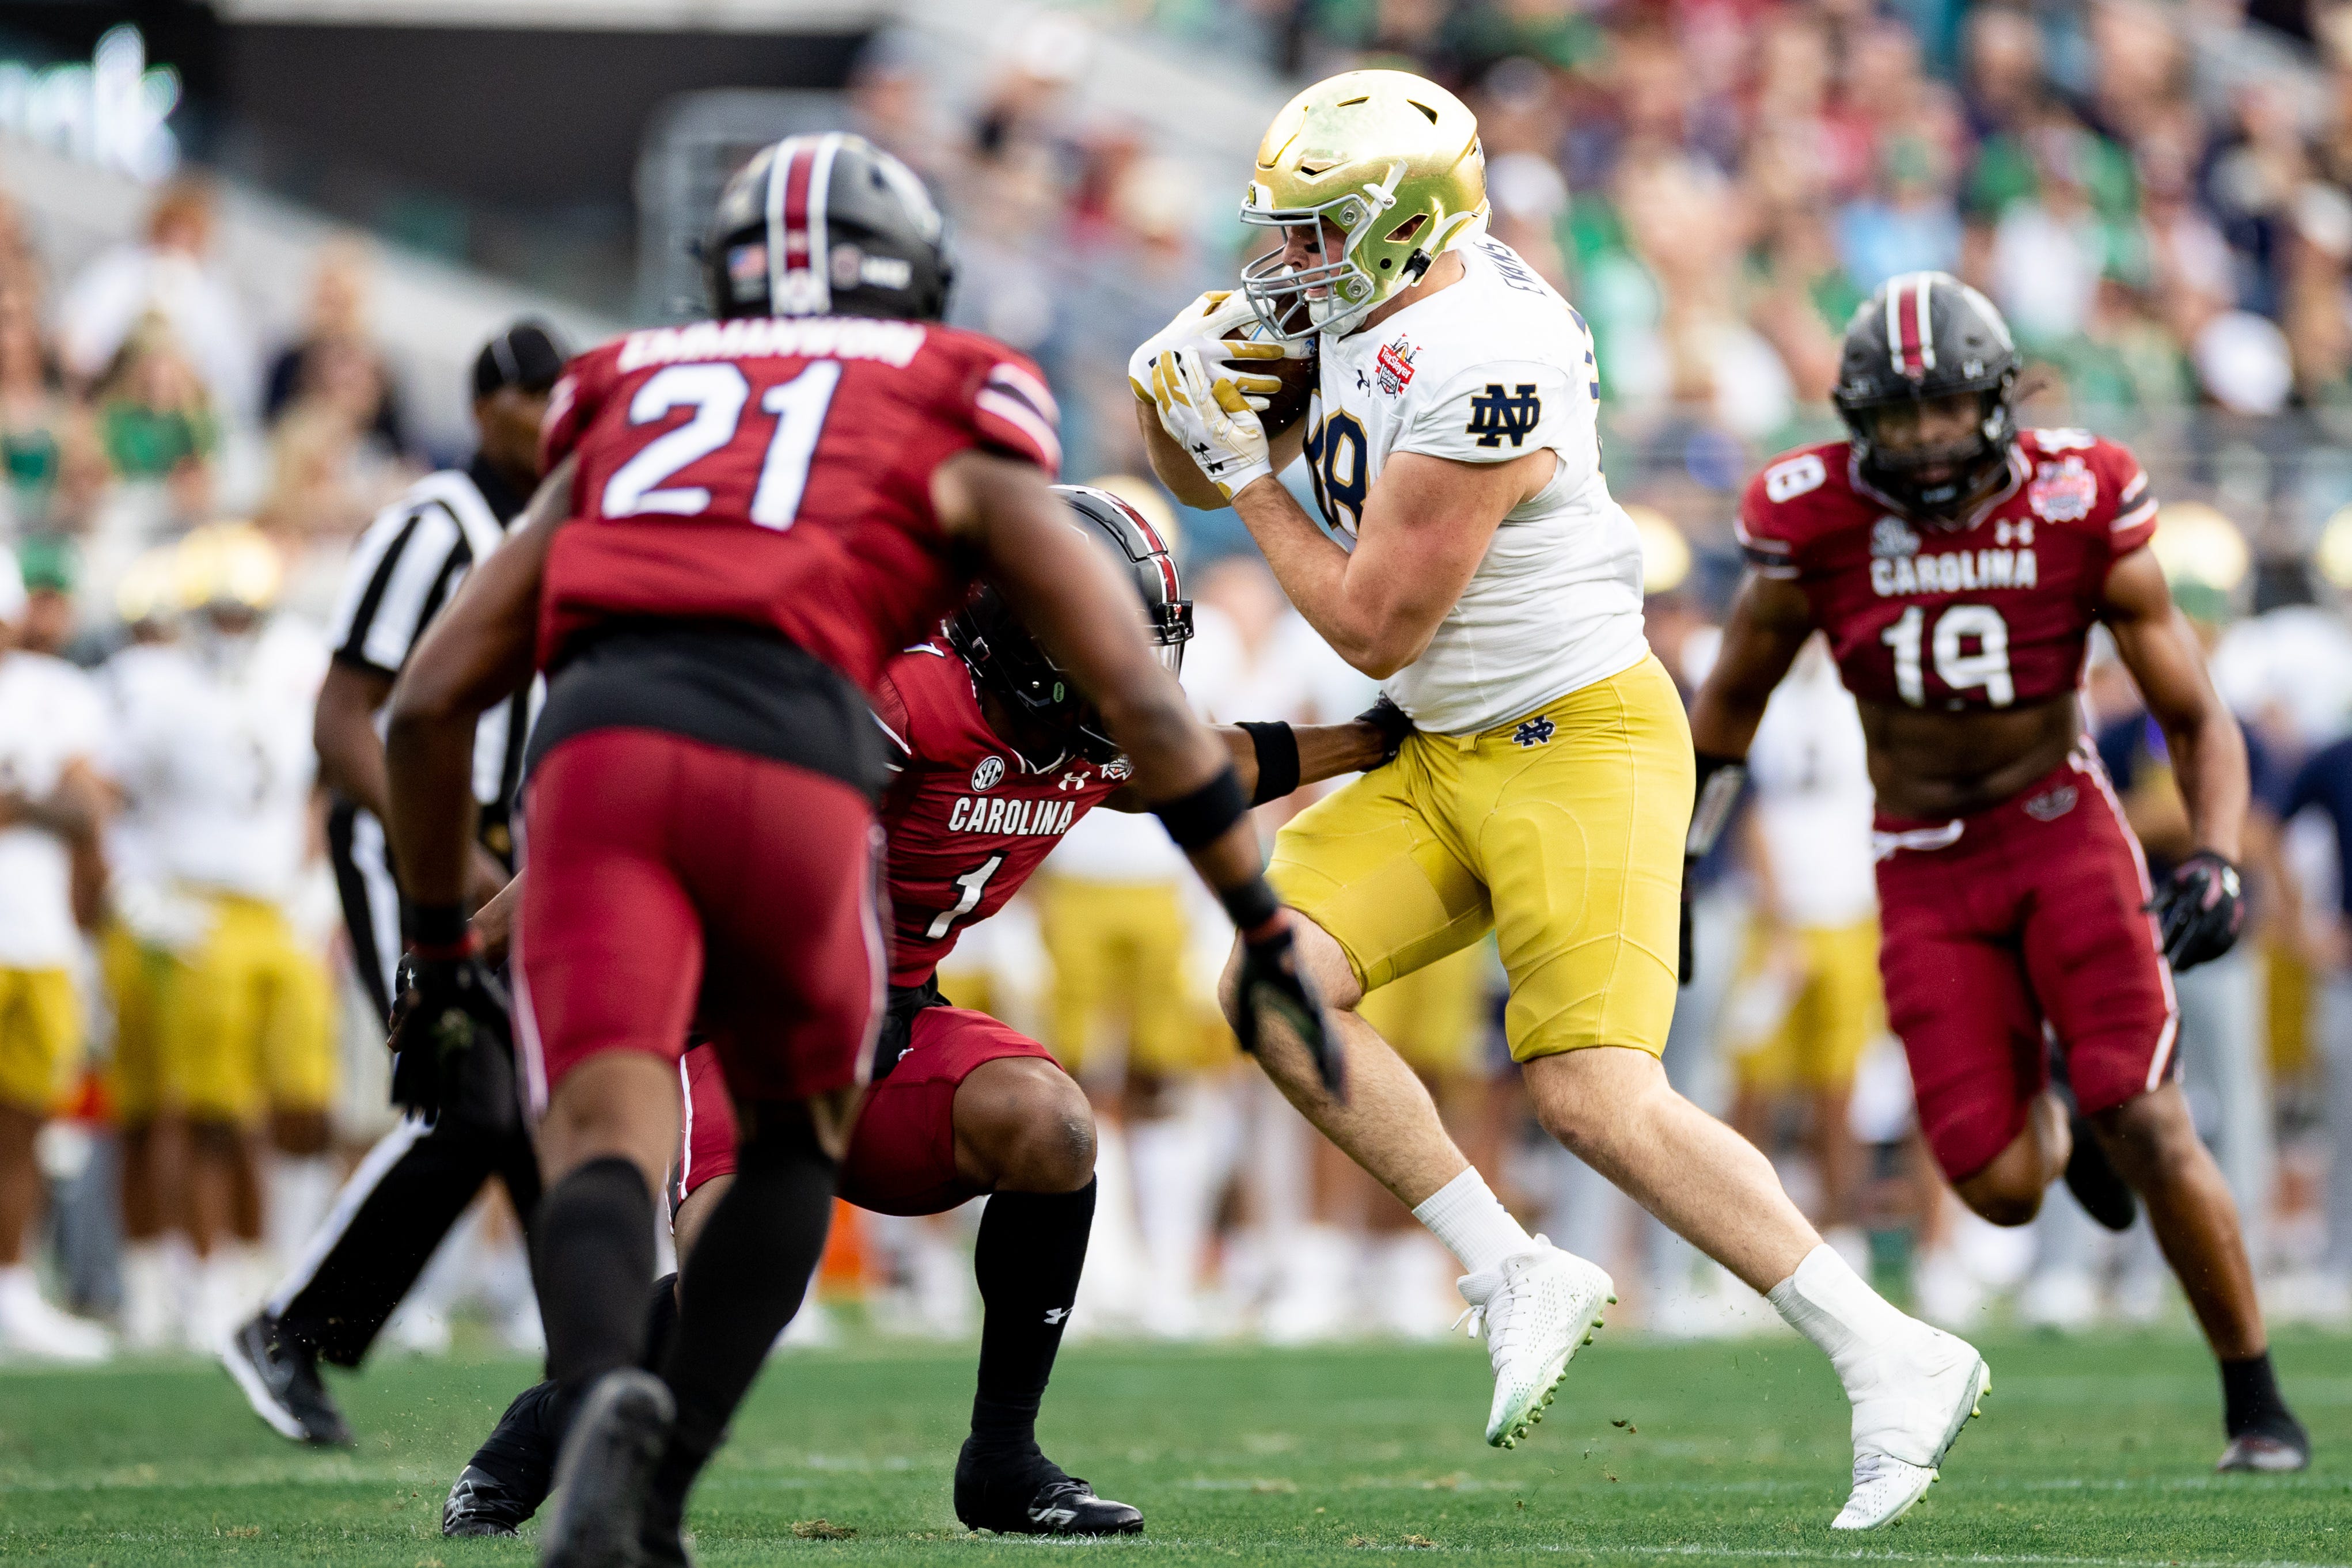 Dec 30, 2022; Jacksonville, FL, USA; Notre Dame Fighting Irish tight end Mitchell Evans (88) makes a catch during the first half against the South Carolina Gamecocks in the 2022 Gator Bowl at TIAA Bank Field. Mandatory Credit: Matt Pendleton-USA TODAY Sports